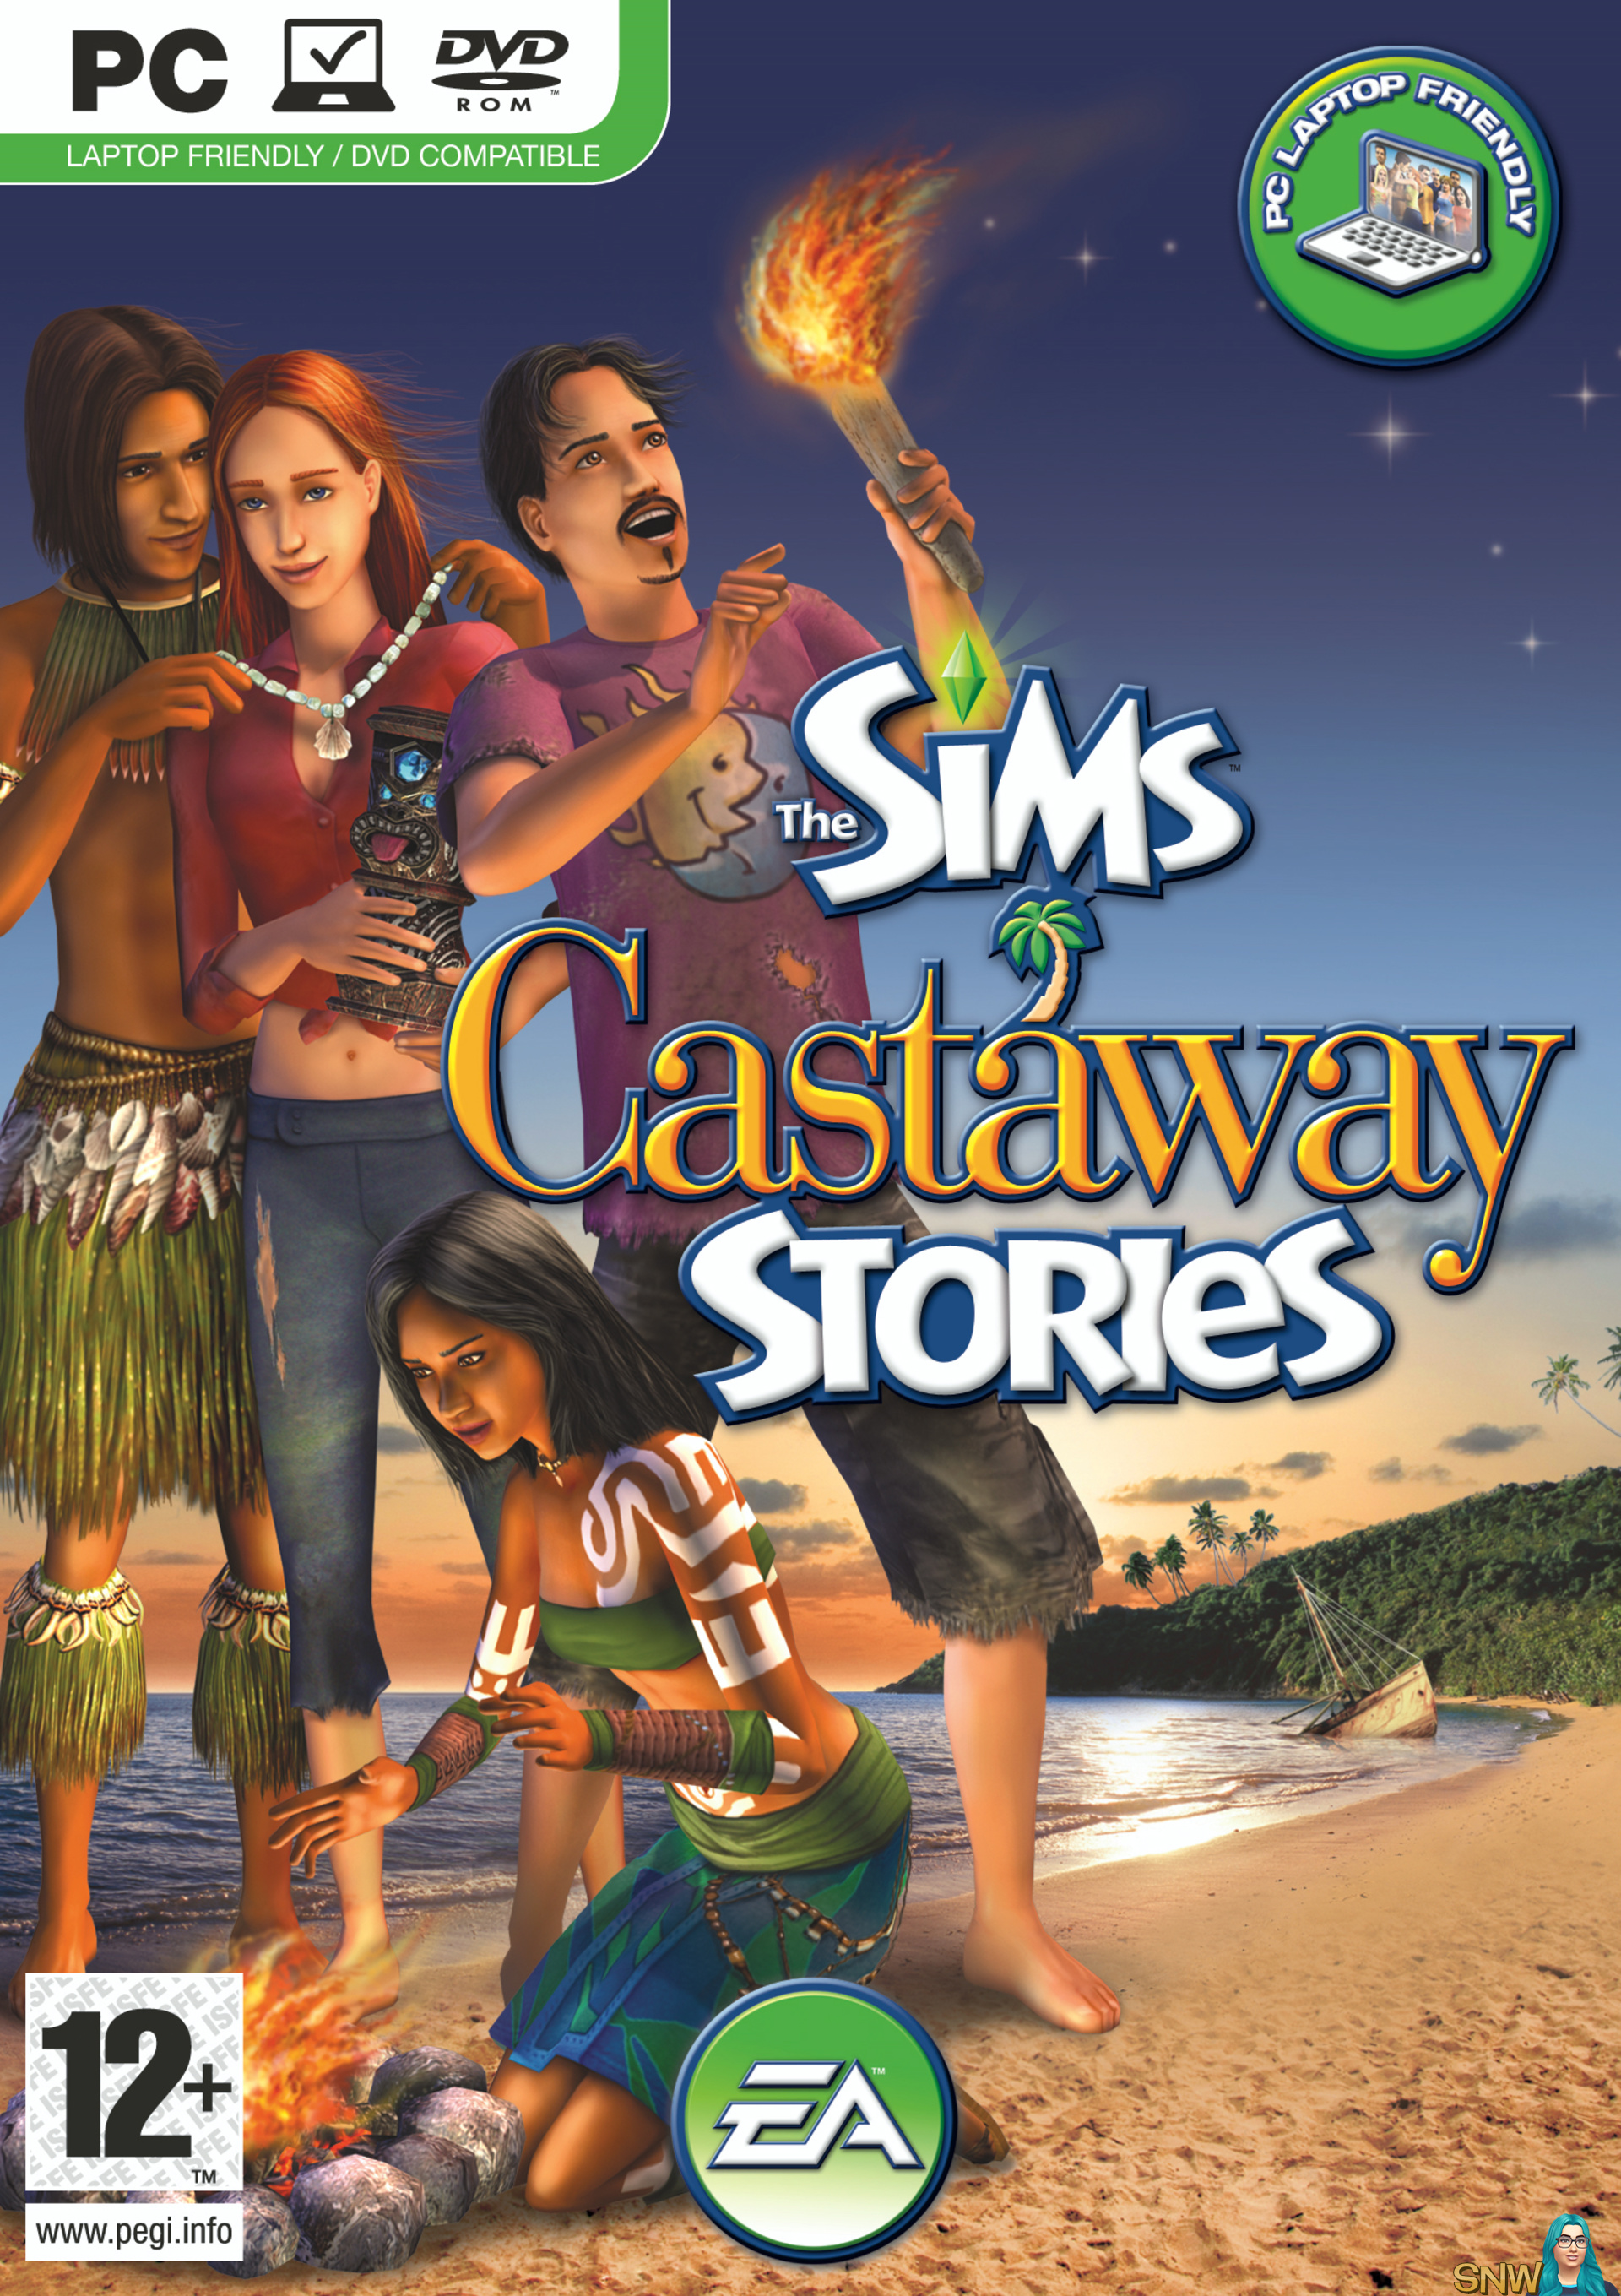 the sims 2 castaway nds